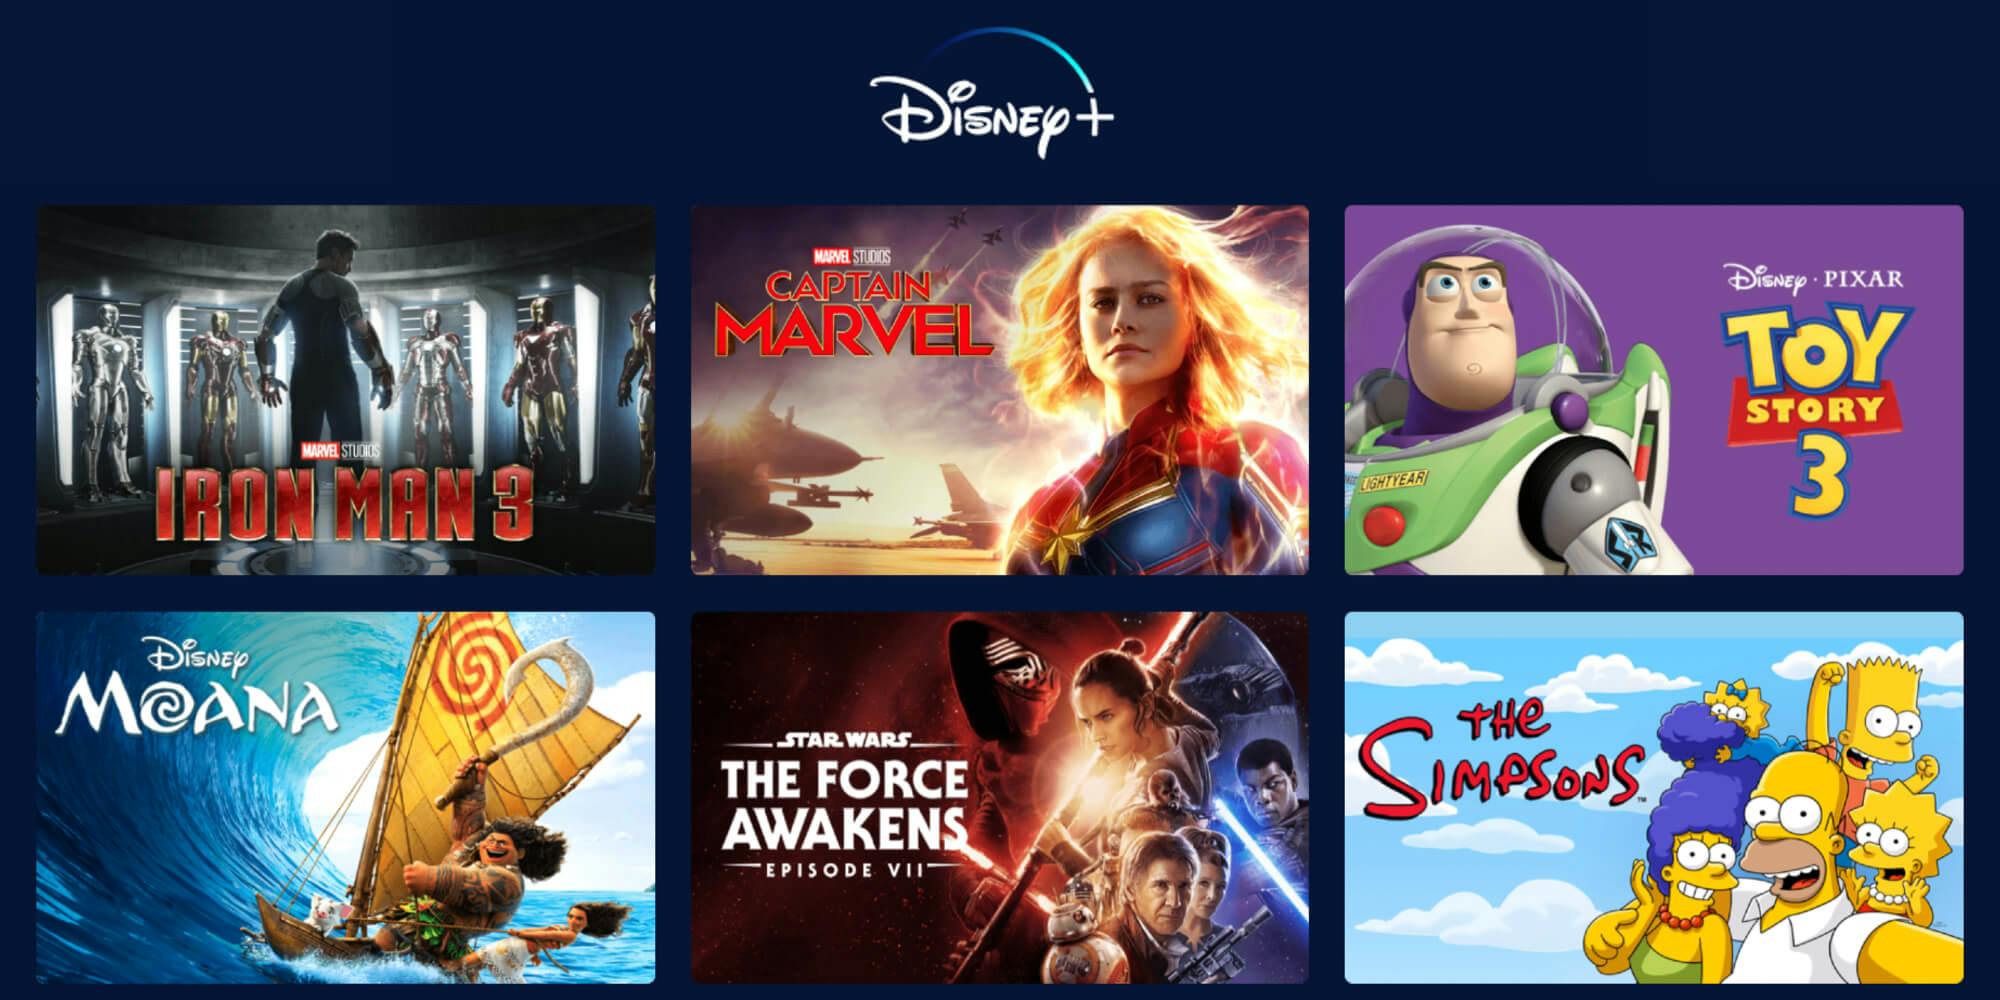 How to Get Disney Plus for Free Trials, Deals, Offers You Can't Refuse